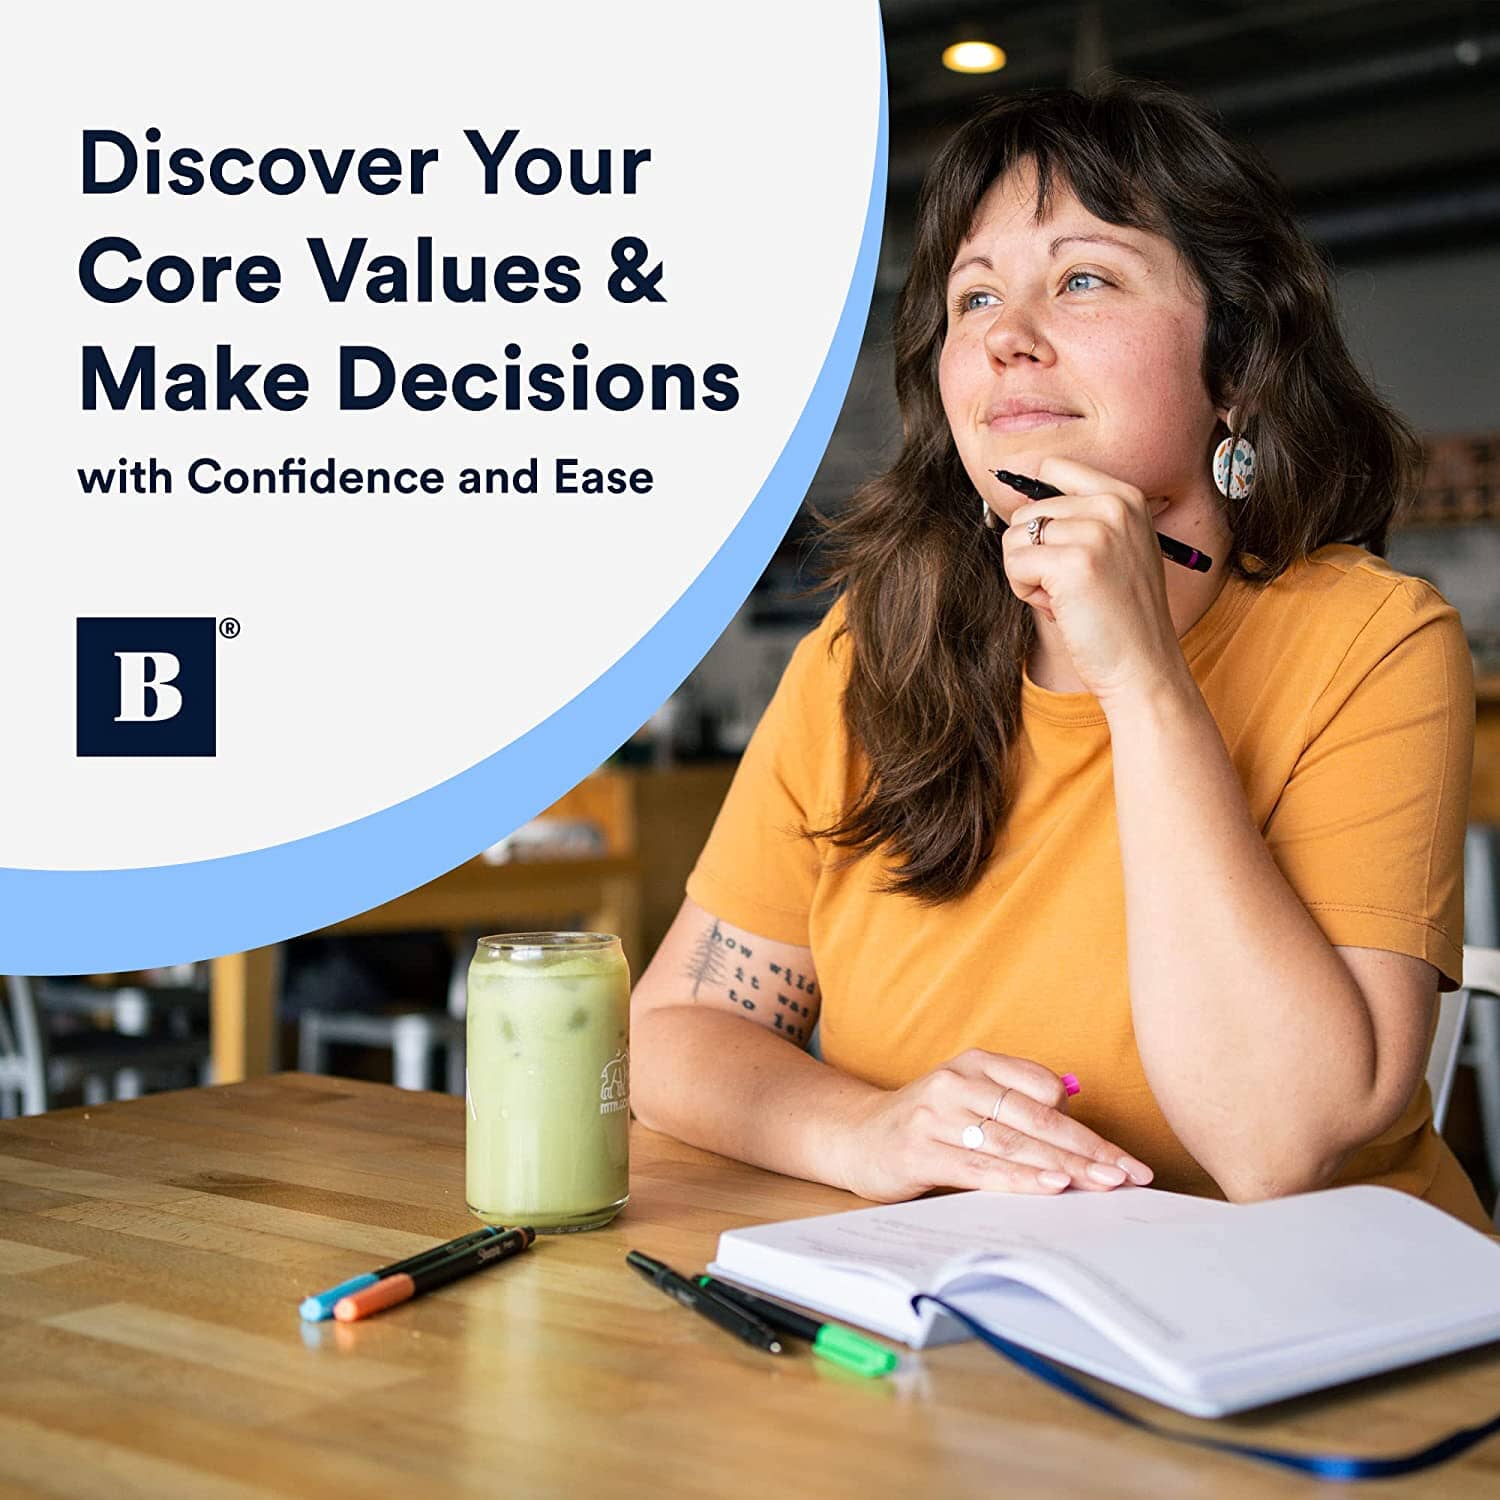 The One Thing - Core Values Bundle Bundle Personal Growth